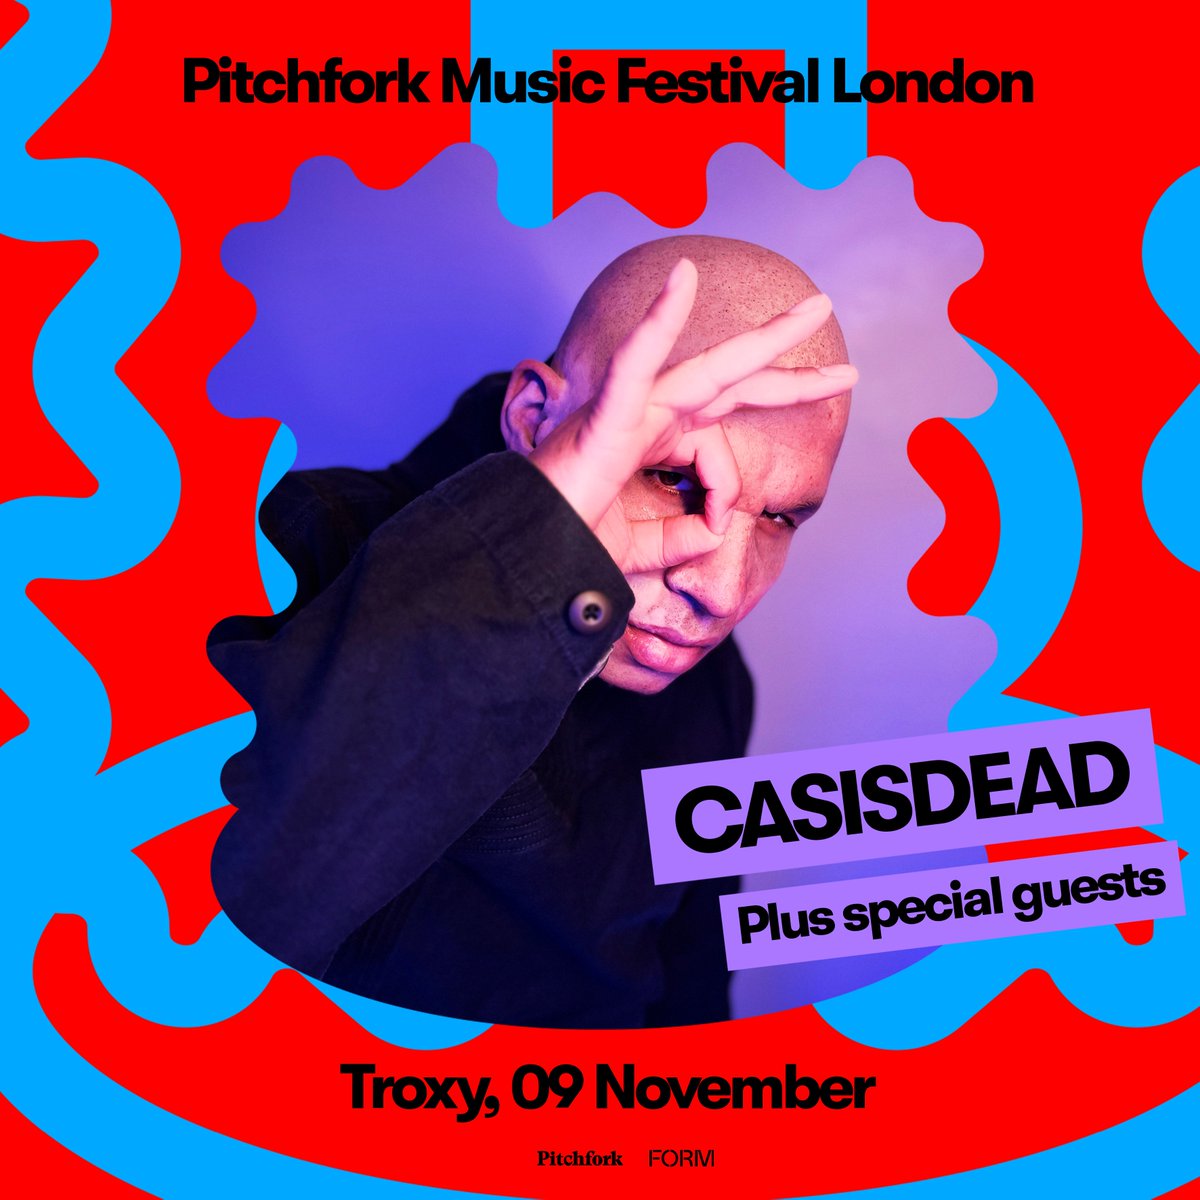 The weekend is in sight and it's payday - RESULT! 🙌 @casisdead @pitchforklondon on sale is now LIVE! Catch legendary UK rap & grime MC plus special guests on stage in November. Grab tickets here link.dice.fm/R3b12cc8cee1 #casisdead #pitchforklondon #londongigs #londonfestival